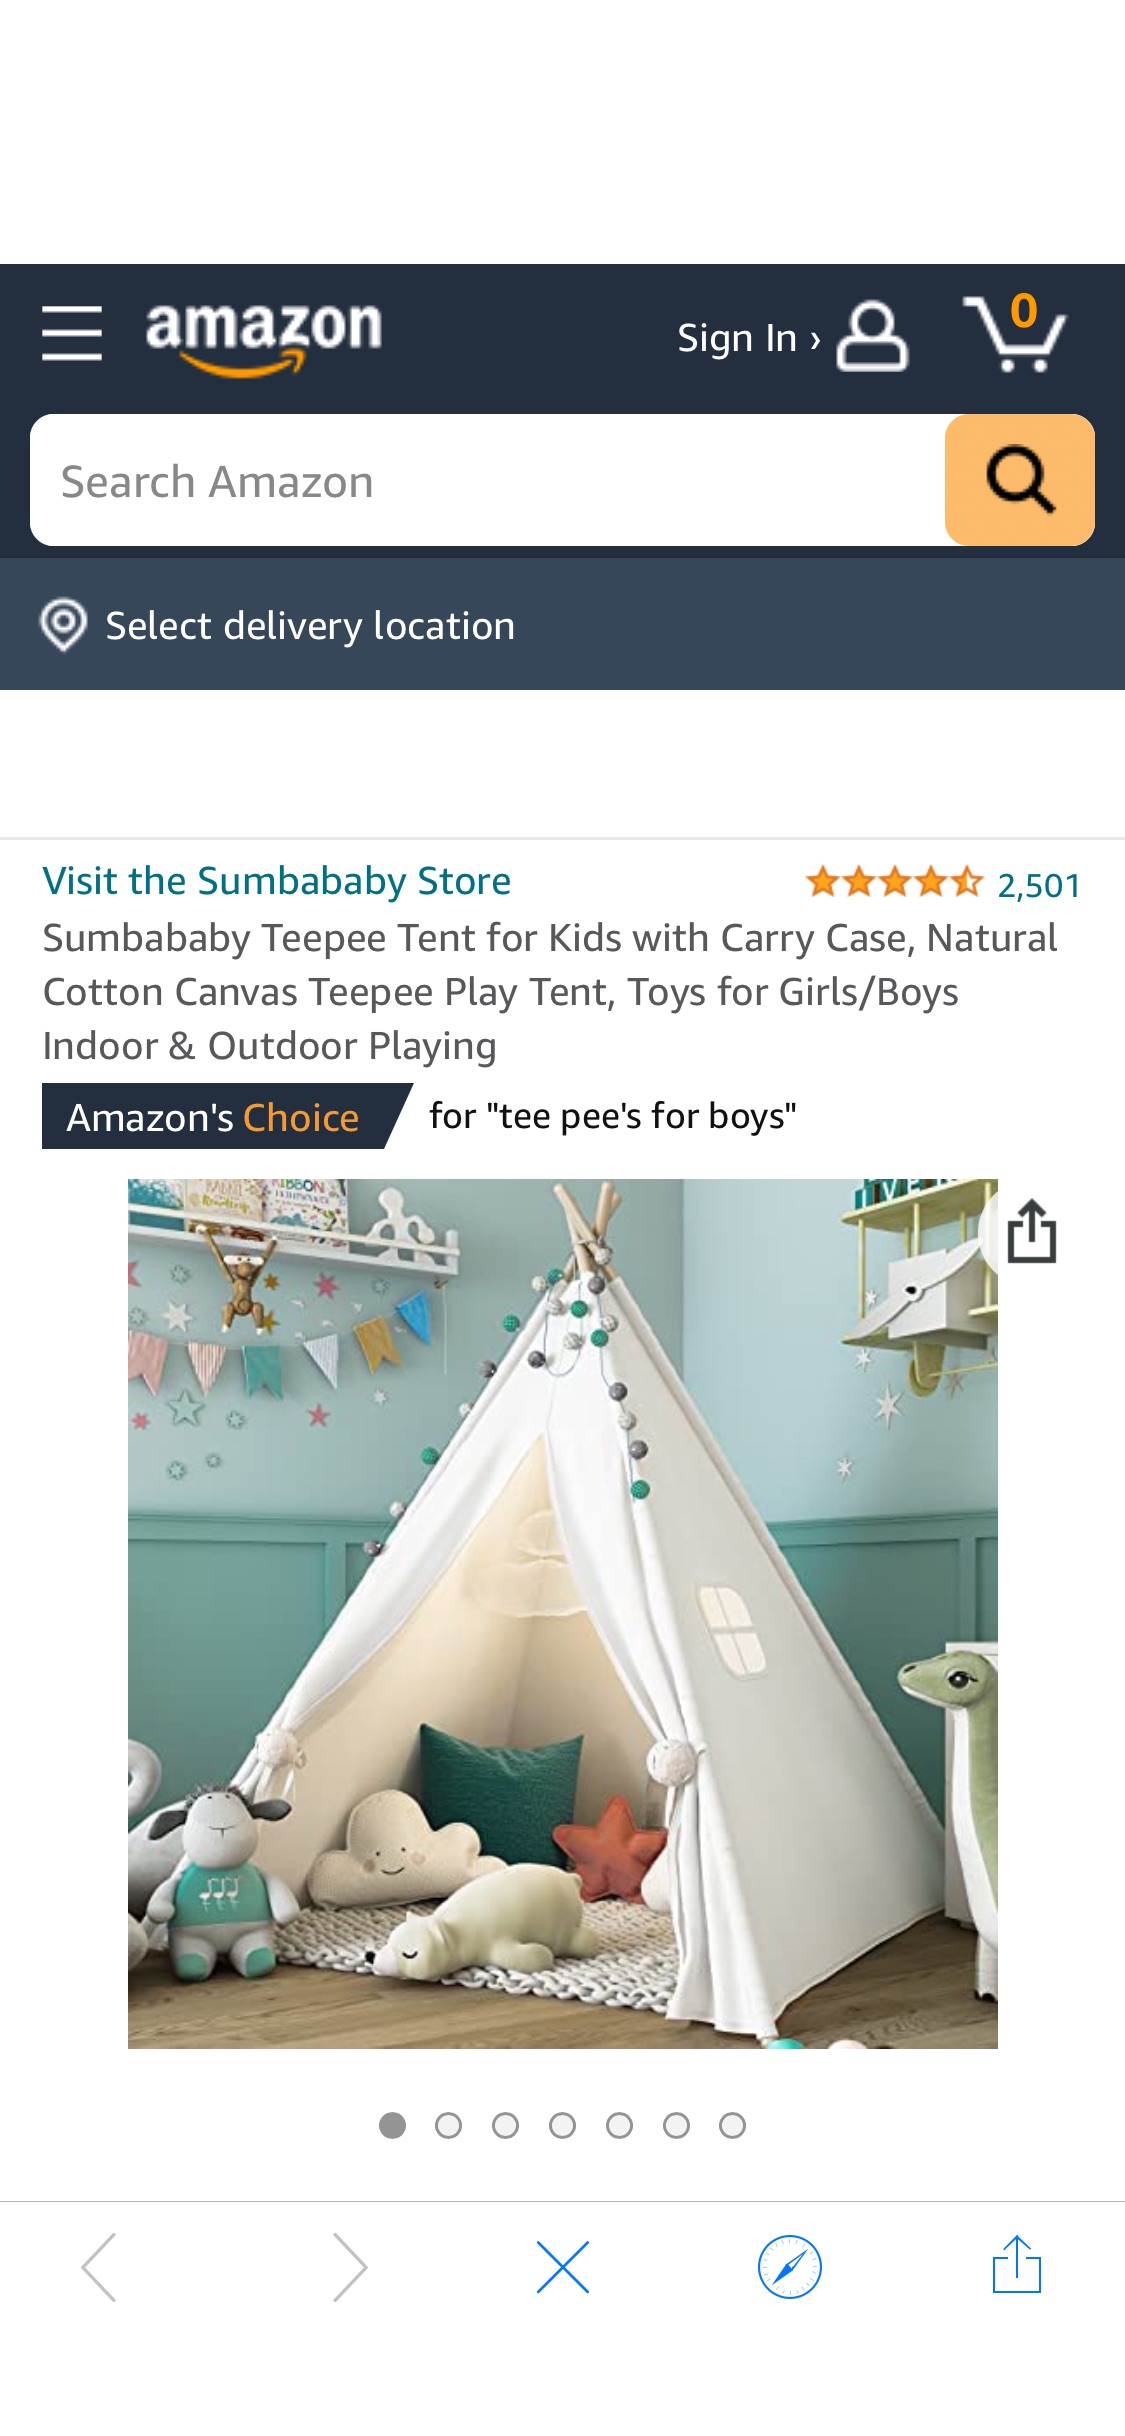 Amazon.com: Sumbababy Teepee Tent for Kids with Carry Case, Natural Cotton Canvas Teepee Play Tent, Toys for Girls/Boys Indoor & Outdoor Playing : Toys & Games帐篷